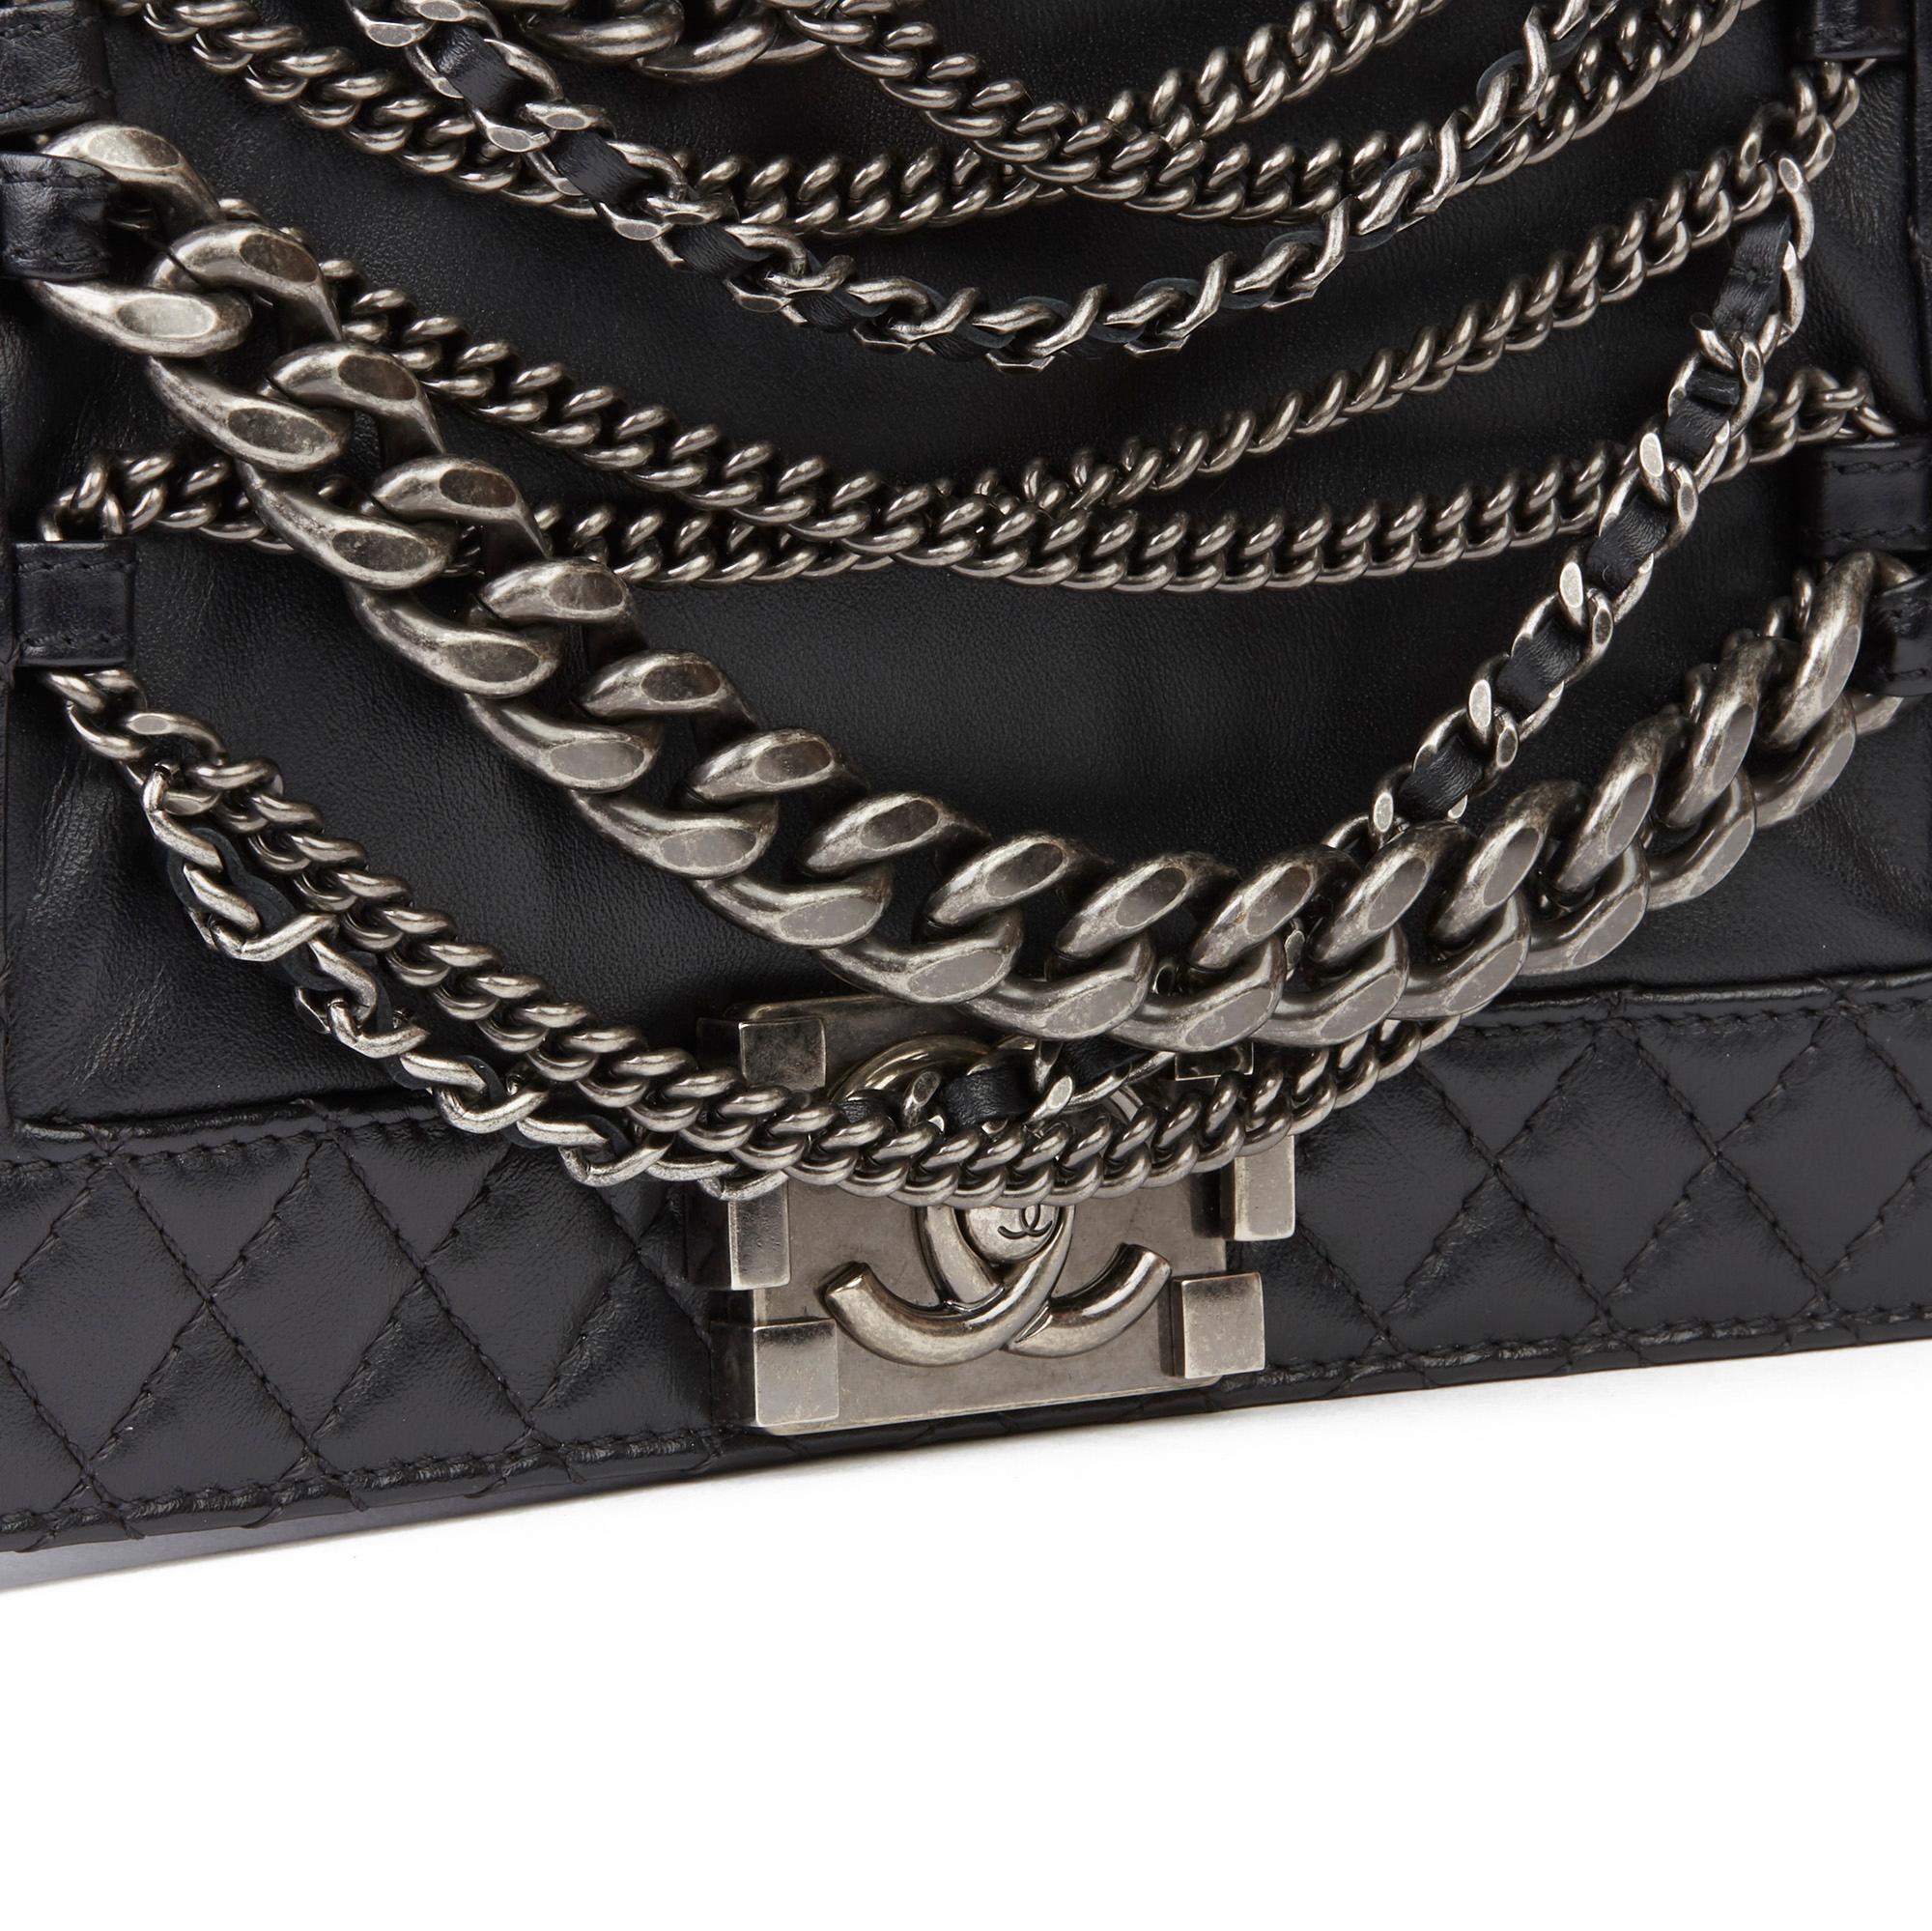 Women's 2014 Chanel Black Quilted Calfskin Leather Enchained Medium Le Boy Reverso